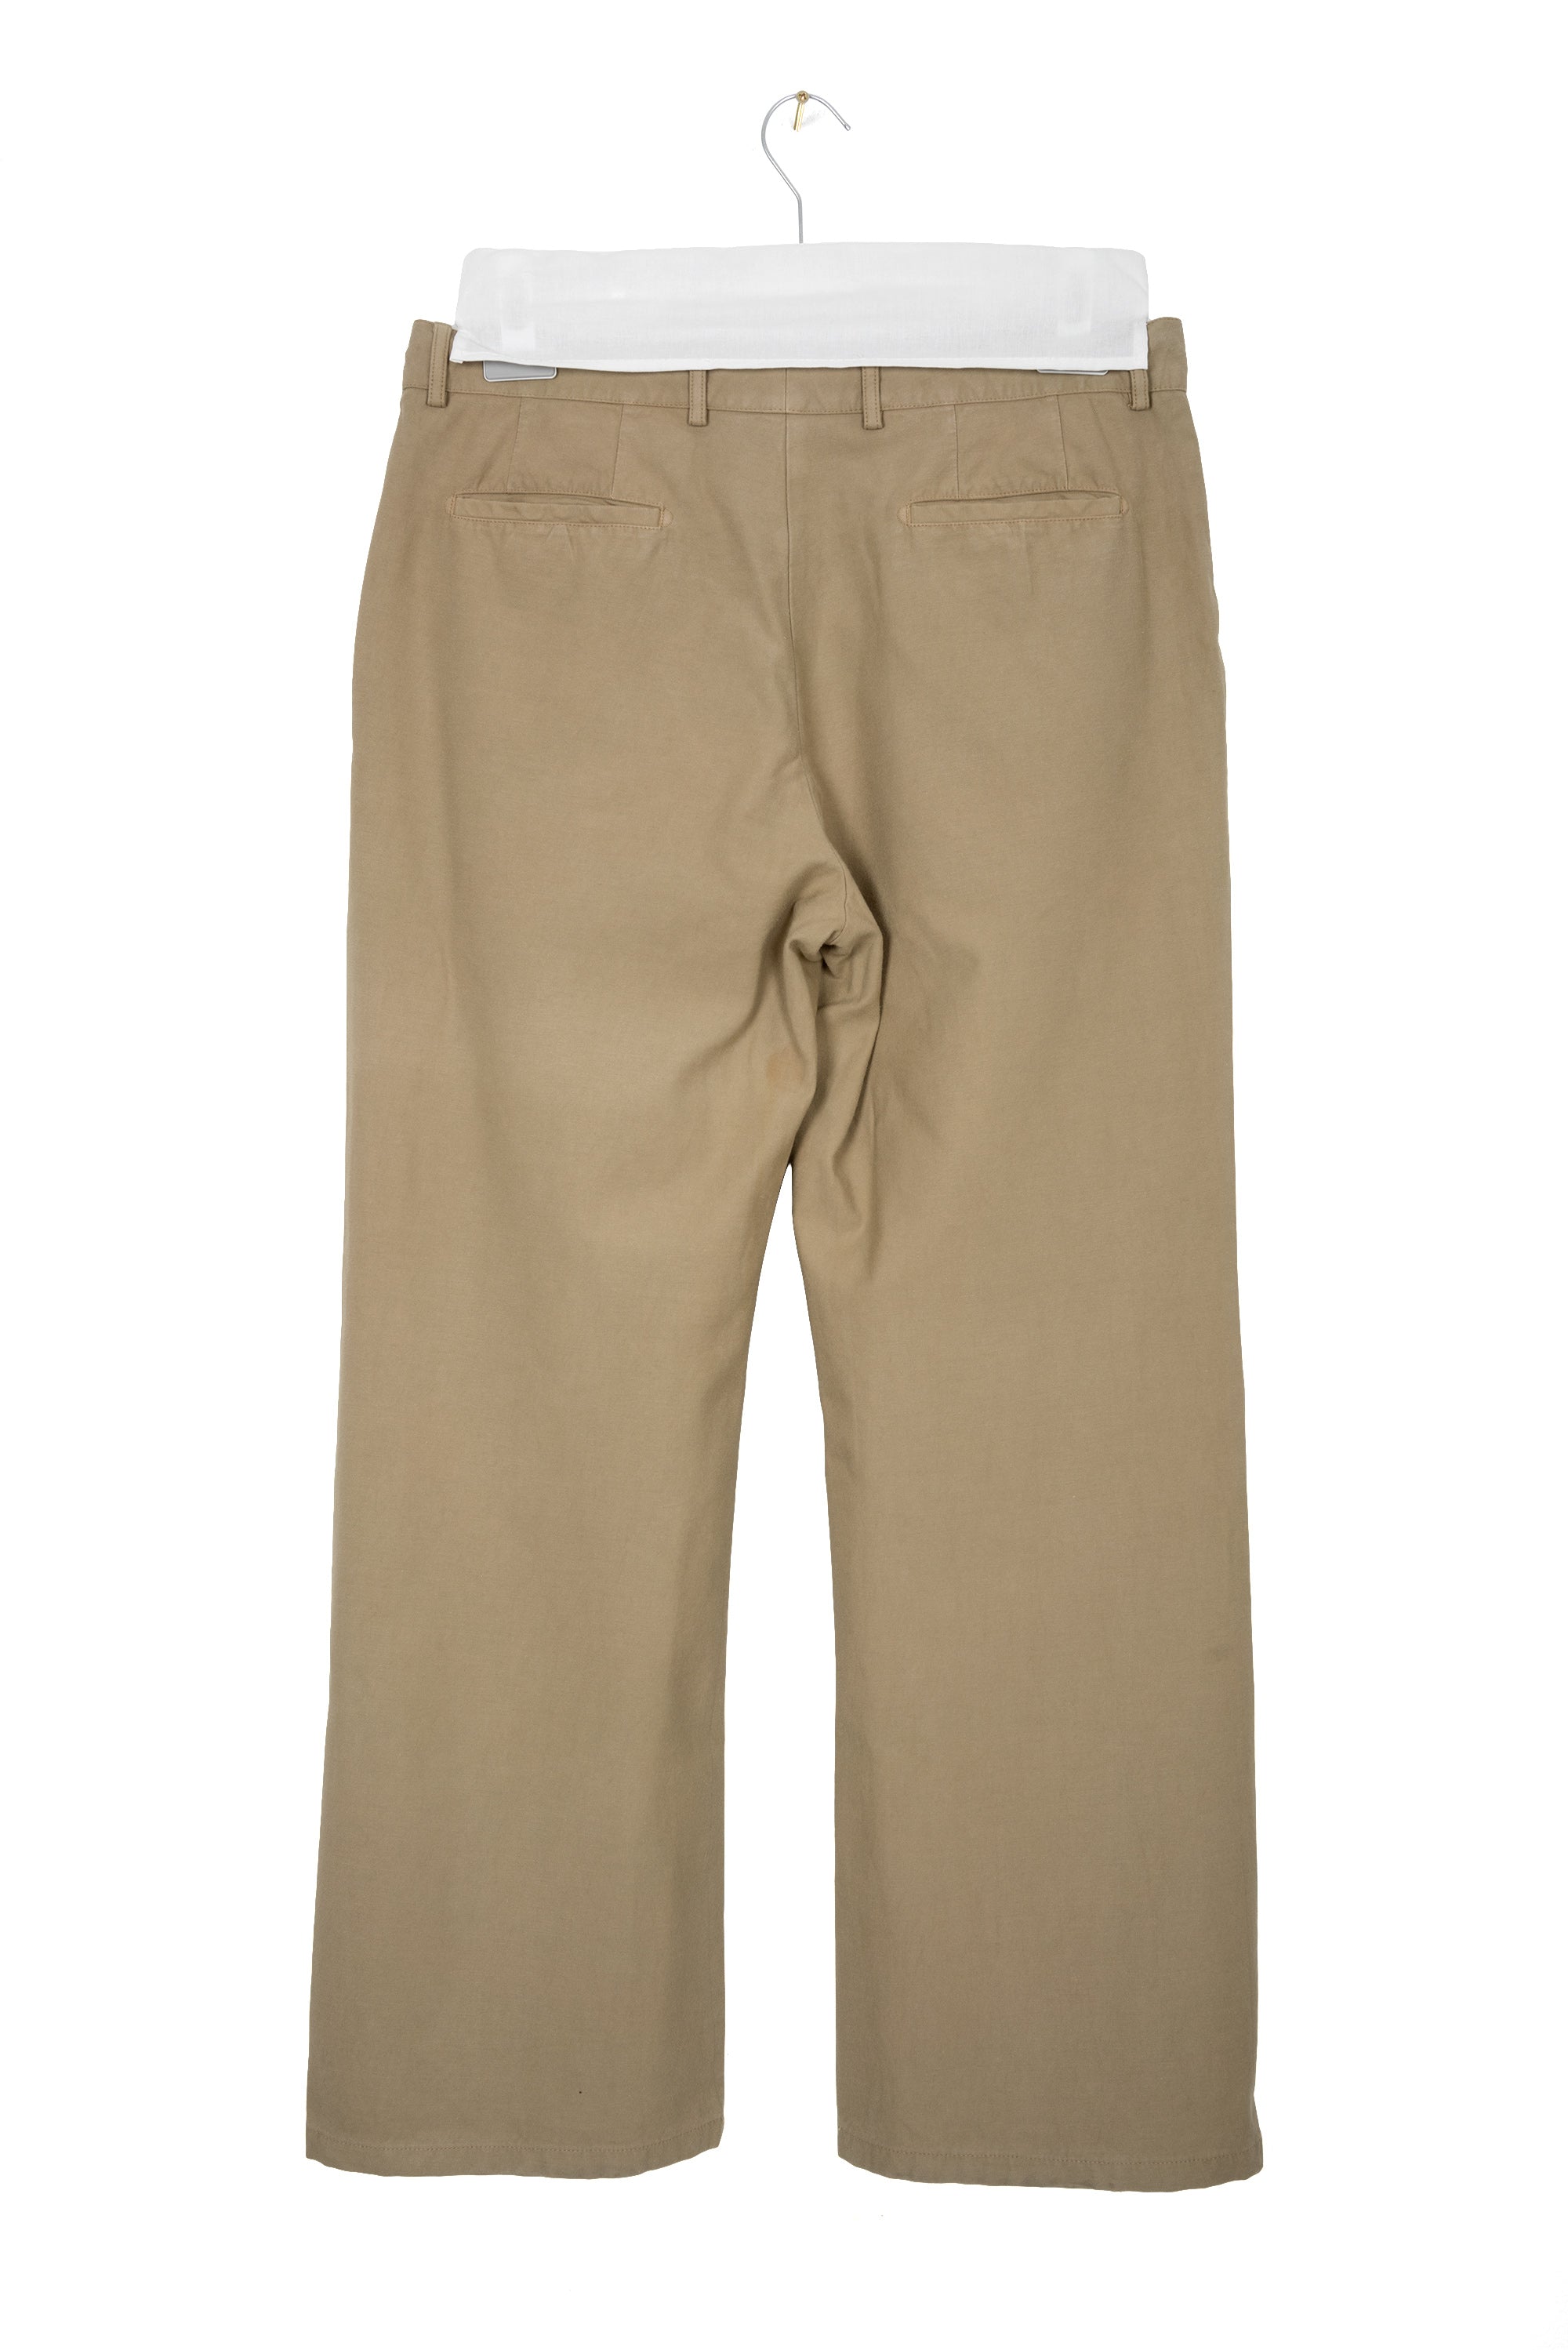 2000 S/S FLARED WIDE ANATOMIC PANTS IN COTTON